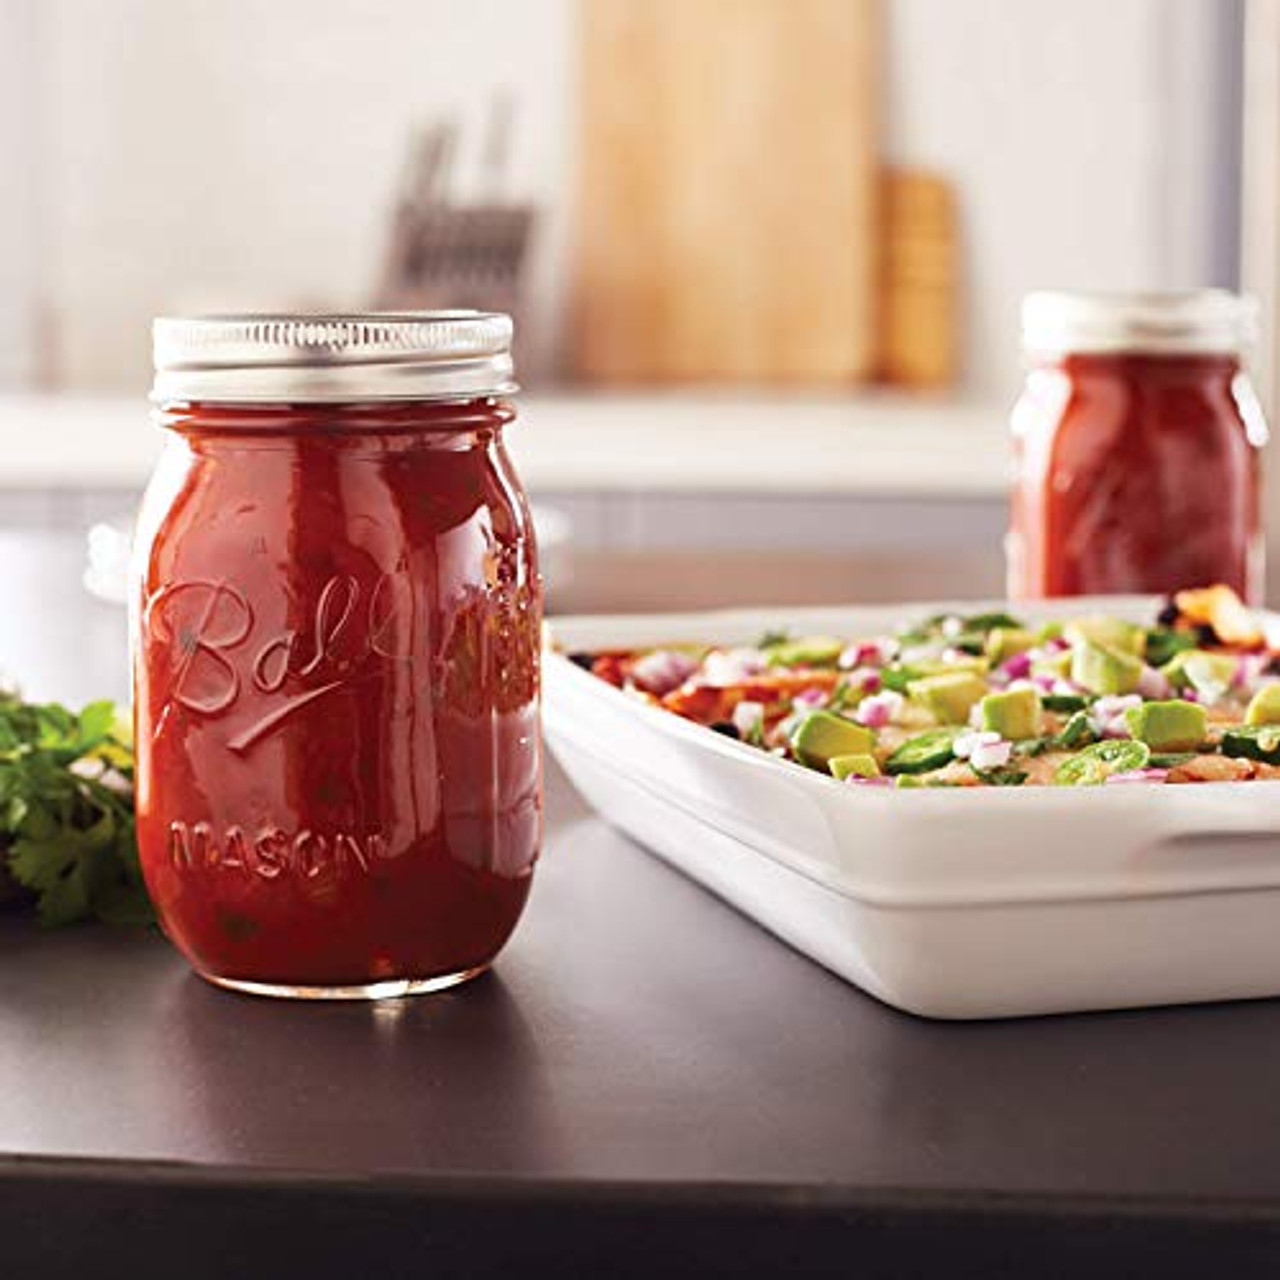 Ball Mason Jars 16 oz Bundle with Non Slip Jar Opener Set of 6 - 16 Ounce  Size Mason Jars with Regular Mouth - Canning Glass Jars with Lids, Heritage